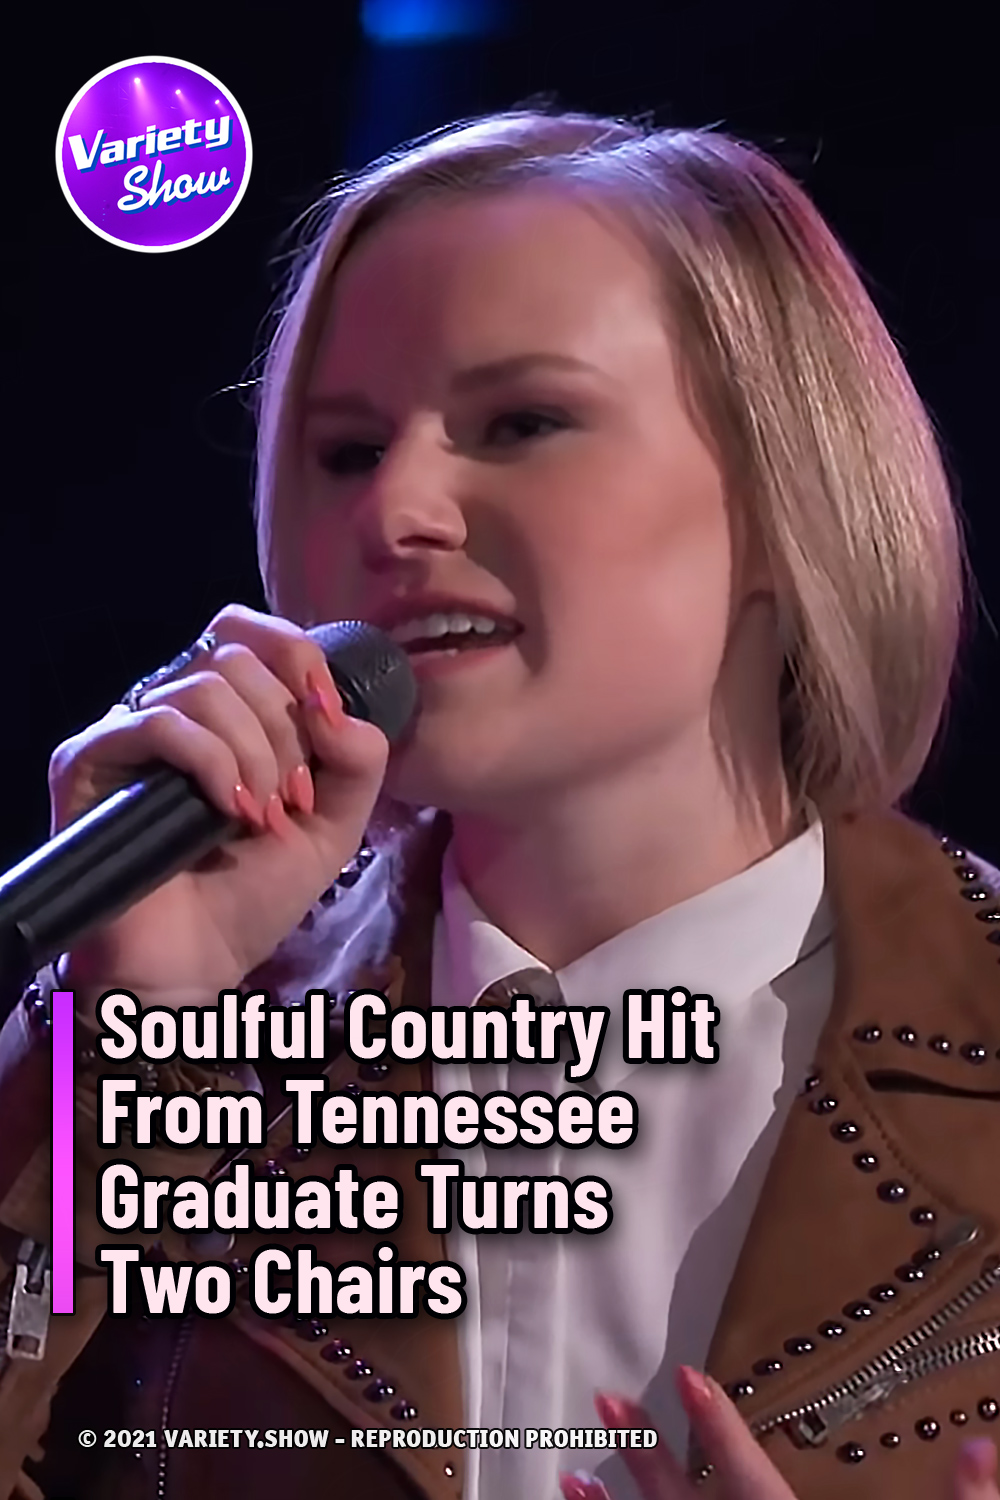 Soulful Country Hit From Tennessee Graduate Turns Two Chairs